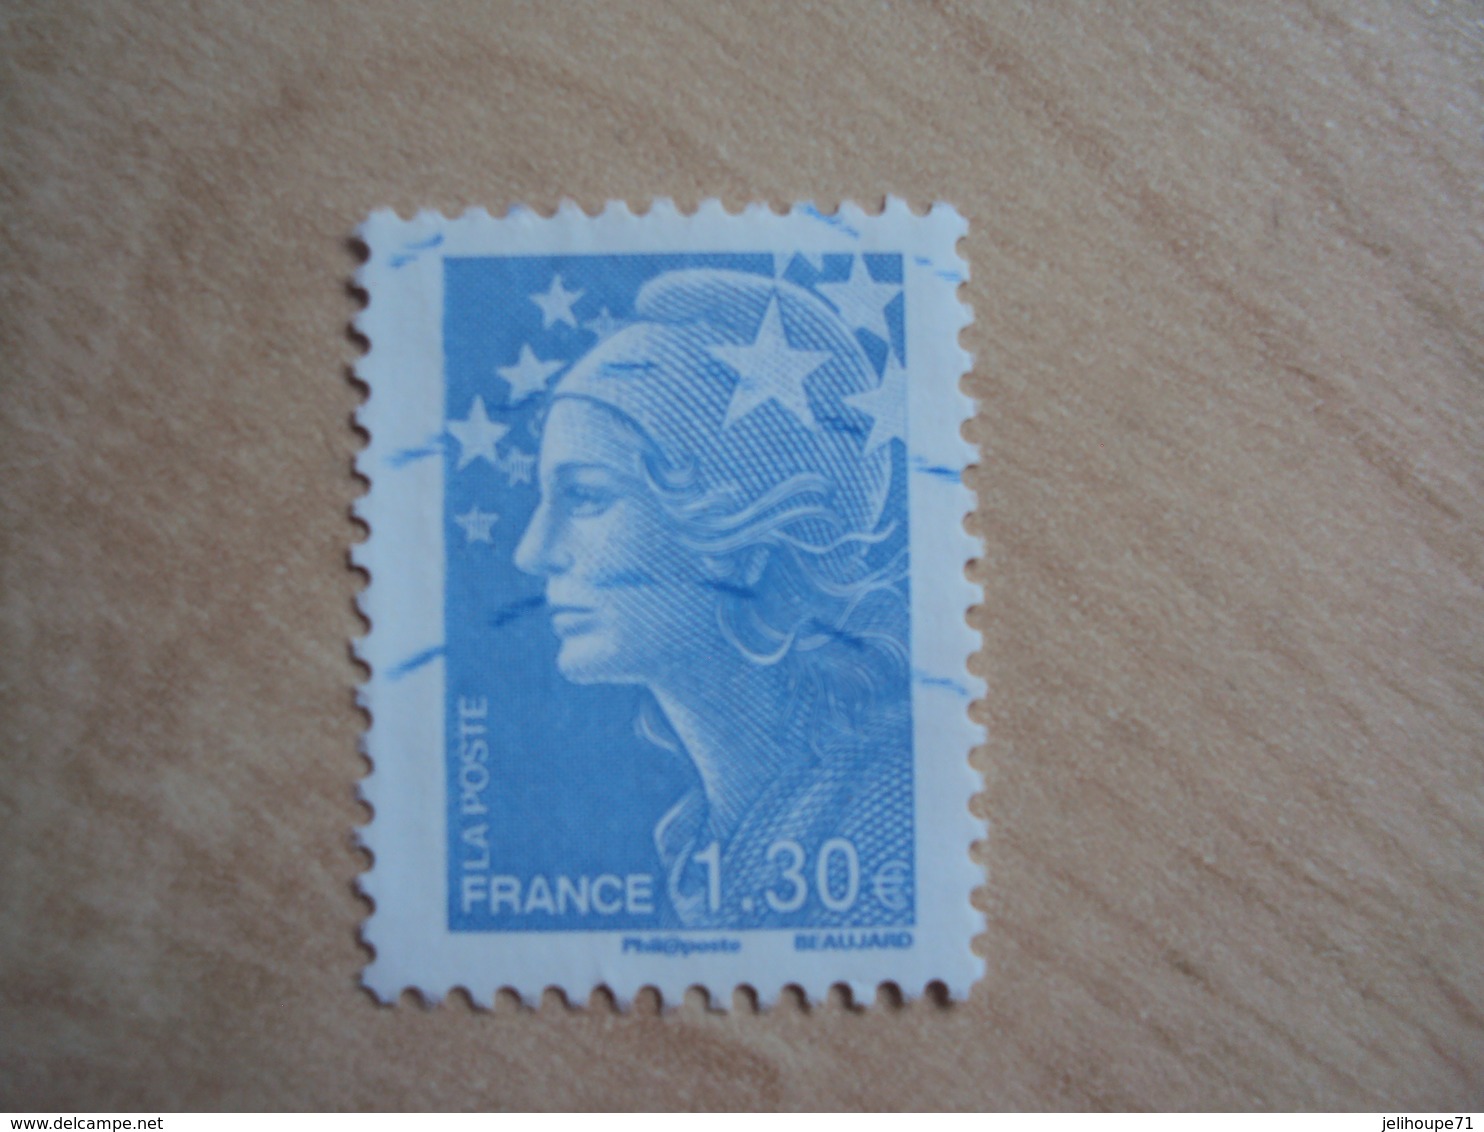 FRANCE 2009 - Timbre "Marianne De Beaujard" N° 4236 Oblitéré - Used Stamps